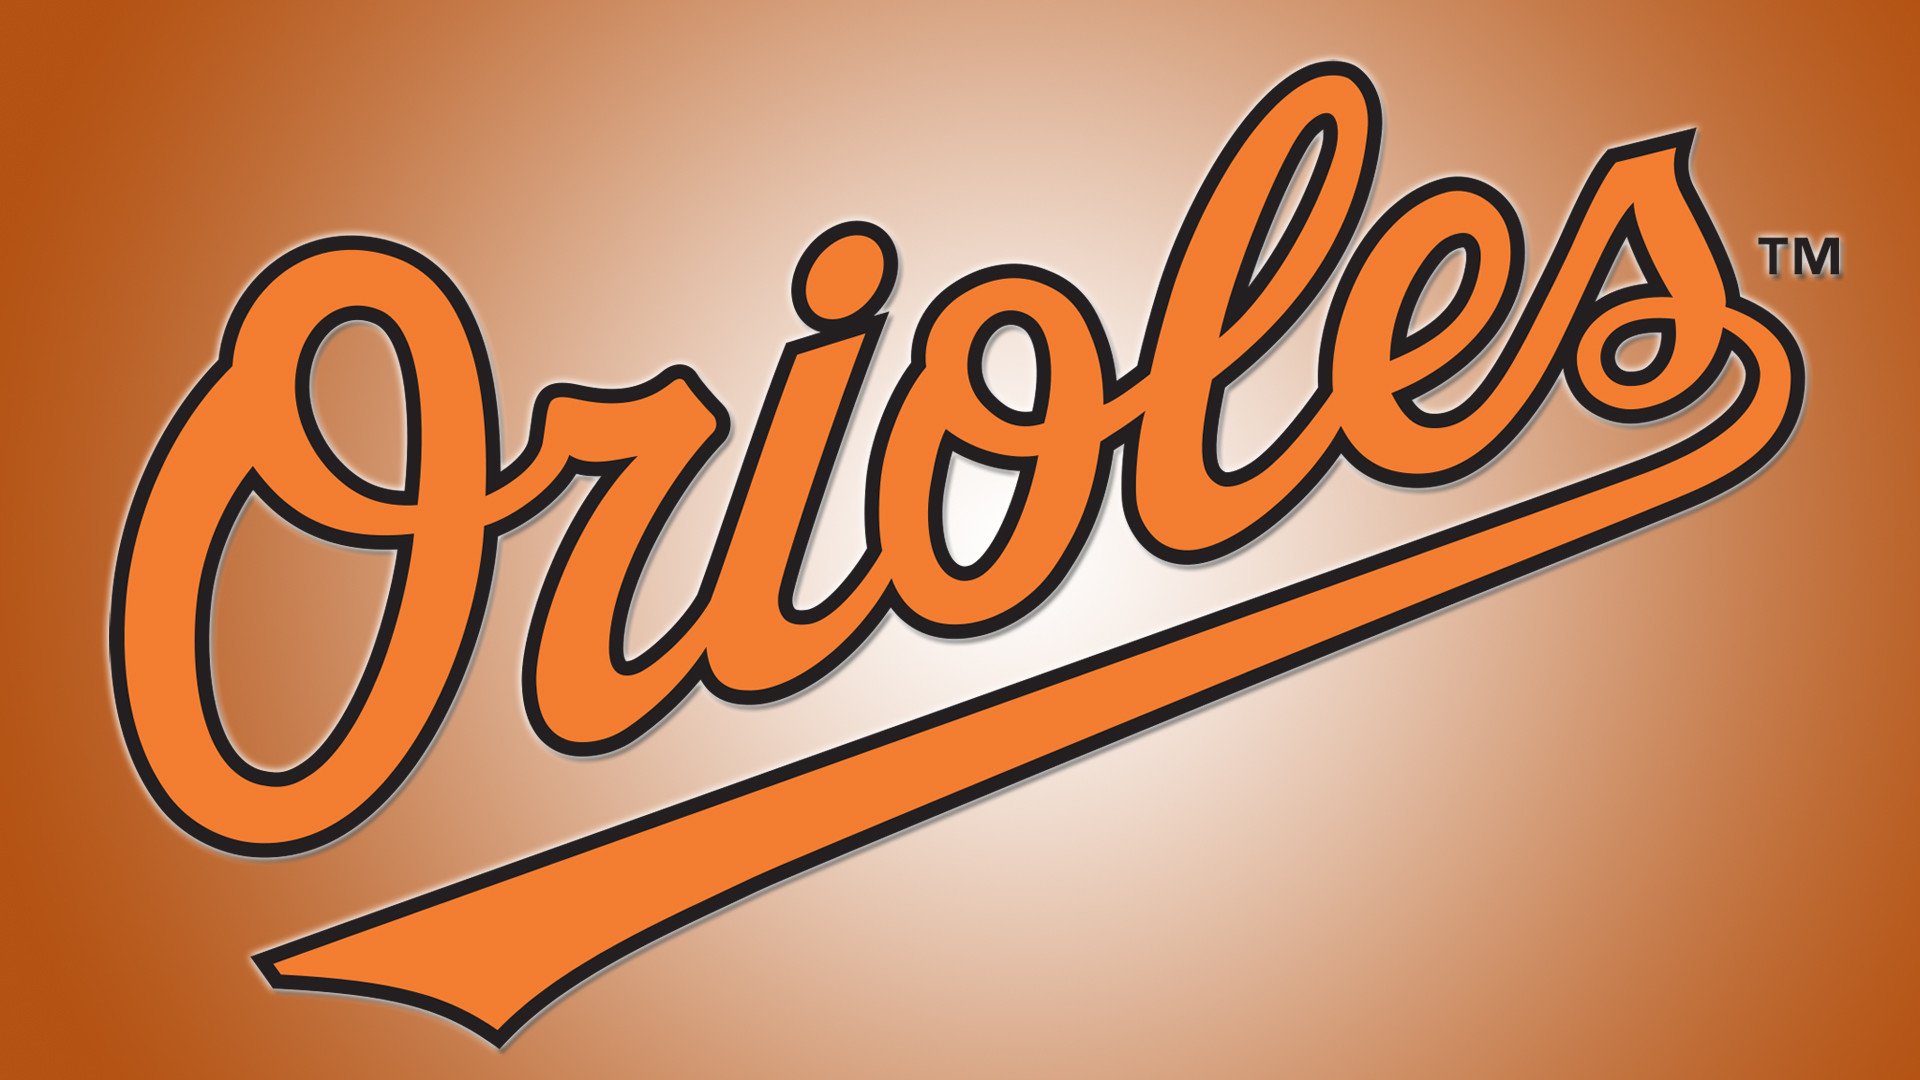 1920x1080 Baltimore Orioles Wallpapers, Browser Themes & More